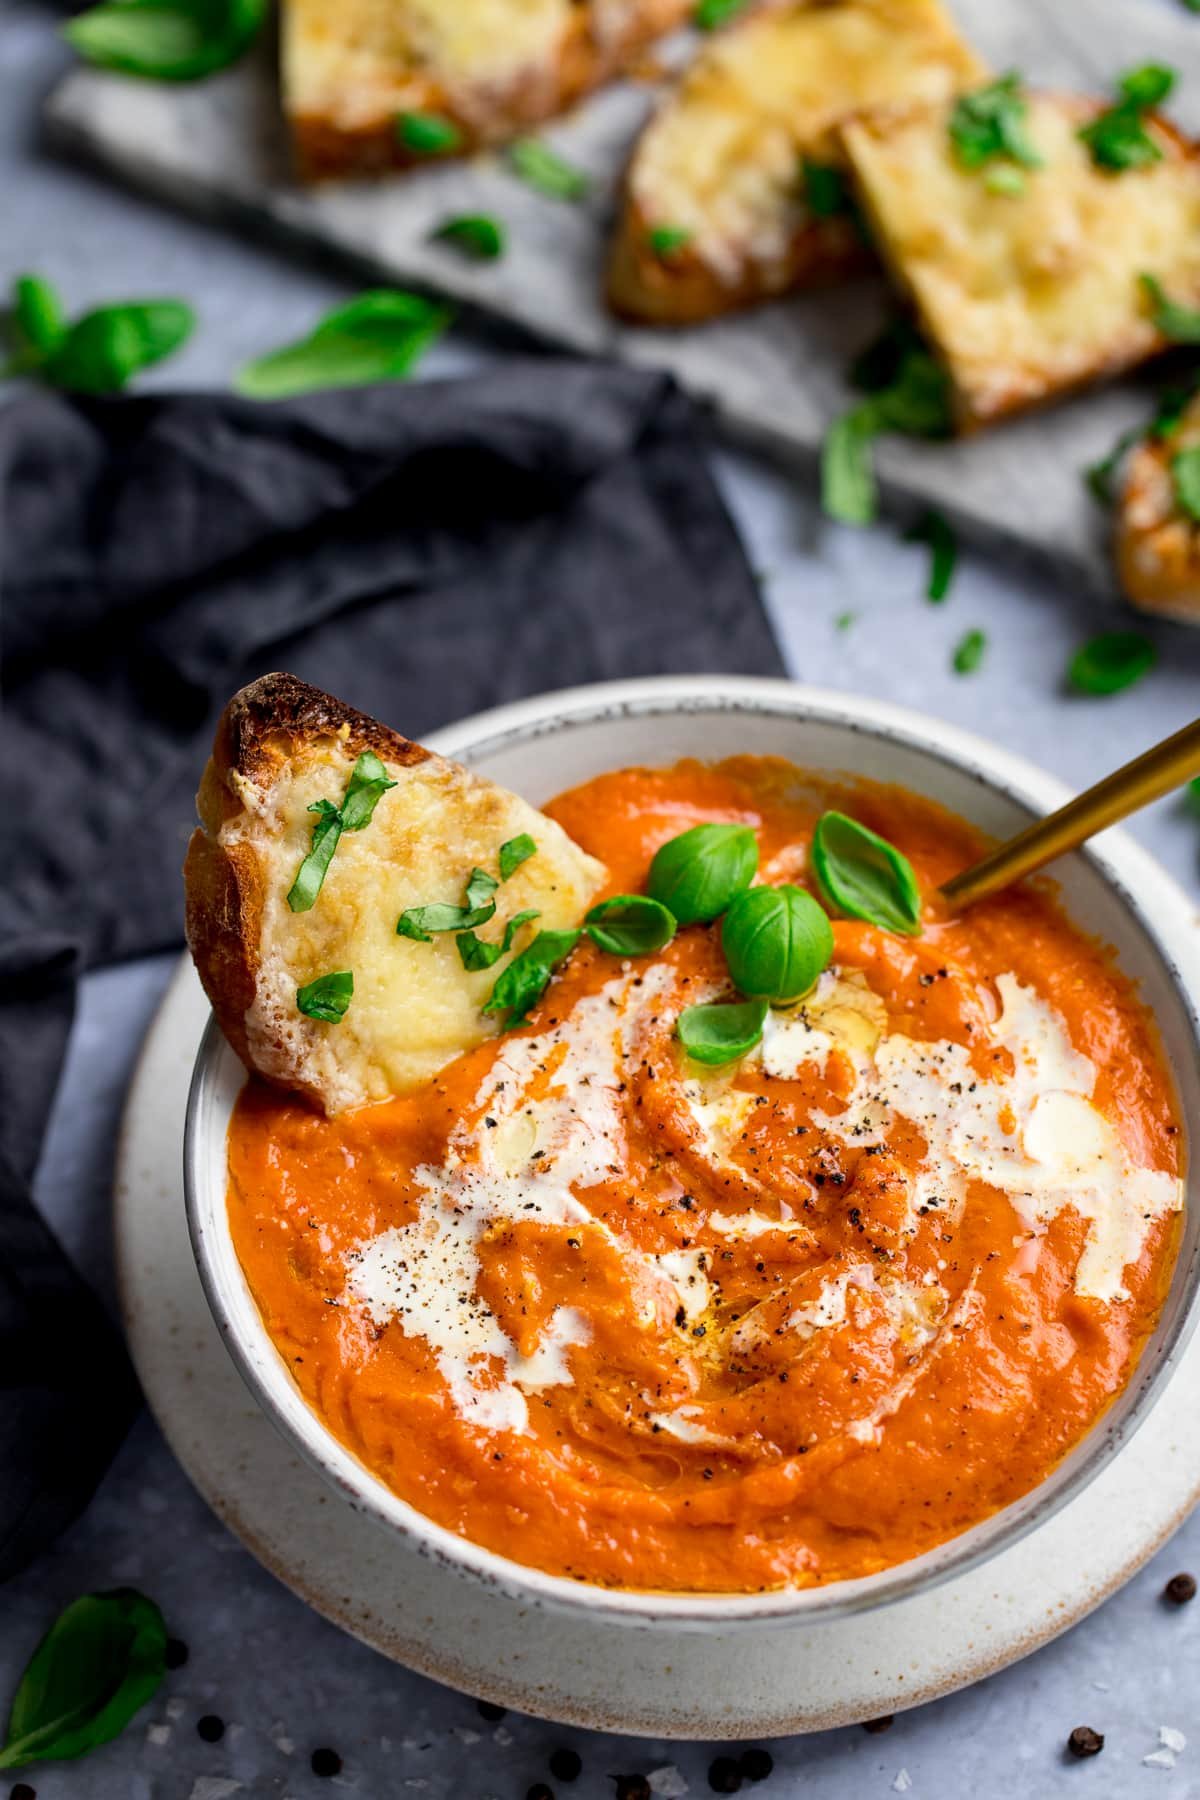 Bowl of rich tomato soup with a slice of basil-cheese toast in it, and more slices of cheese toast on the side.